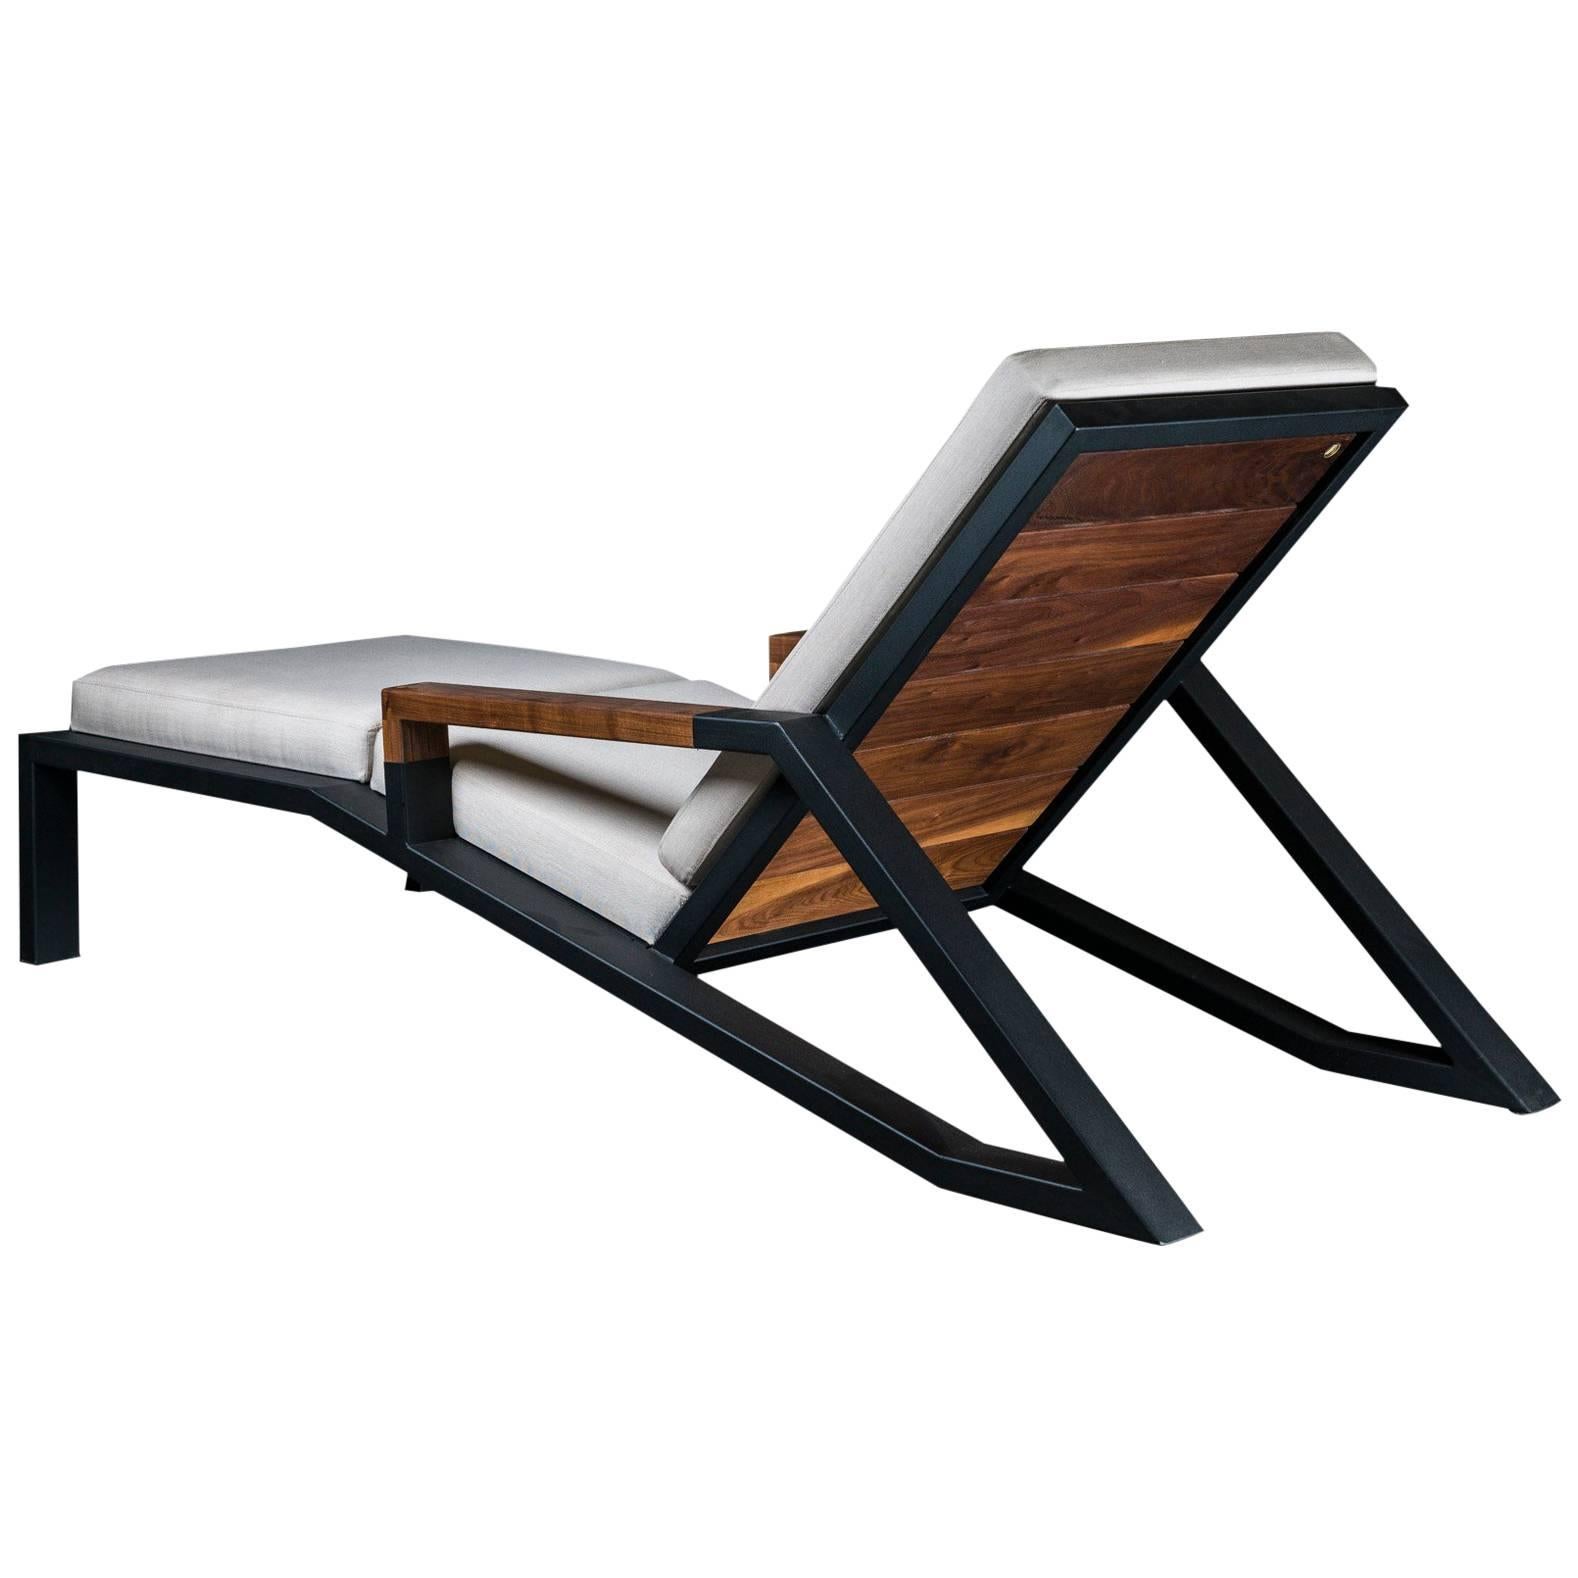 Baltimore Lounge Chair by Ambrozia, Walnut, Black Steel and Beige Upholstery For Sale